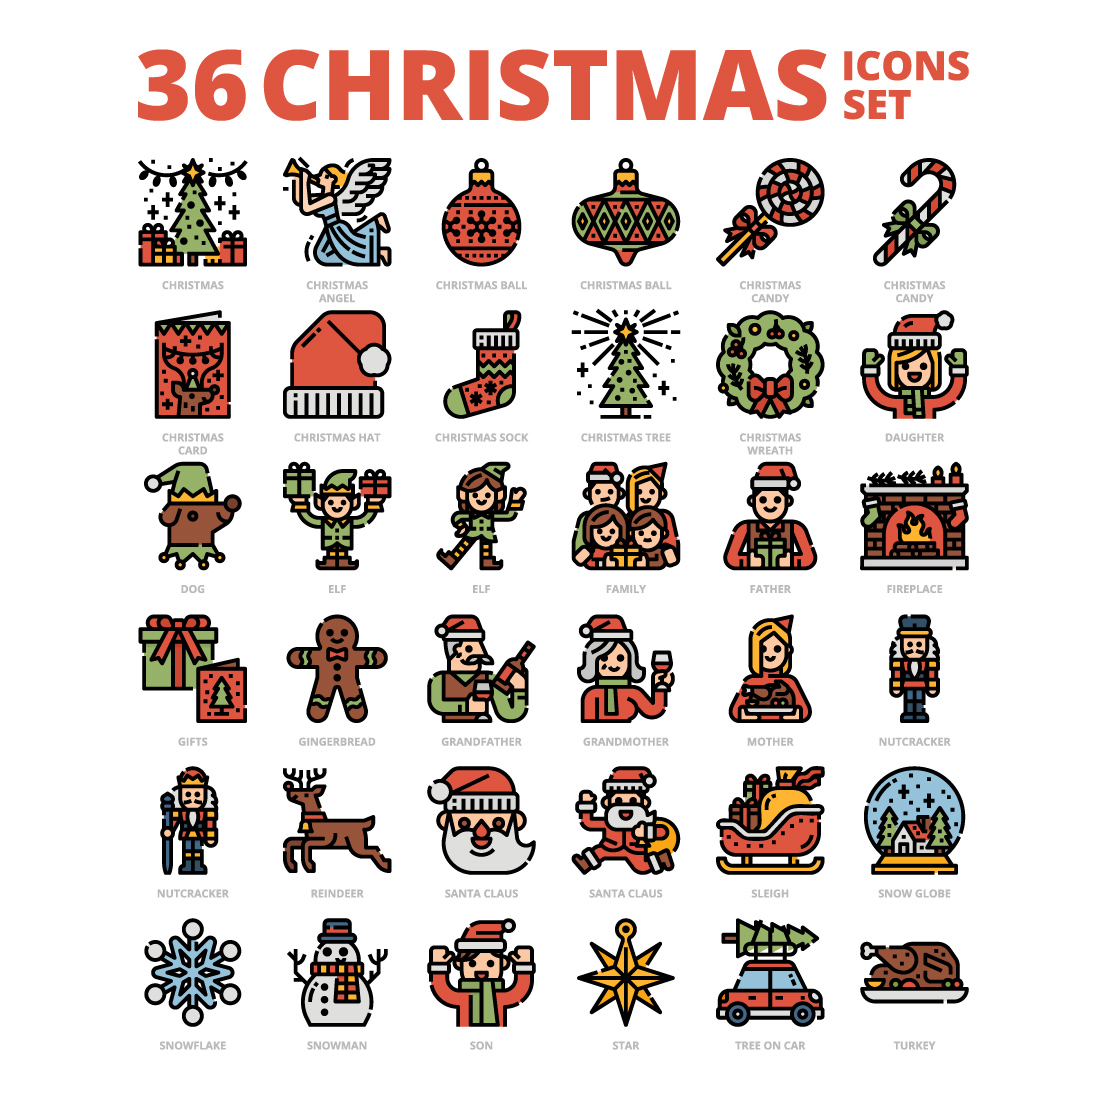 36 Christmas Icons Set x 4 Styles cover image.